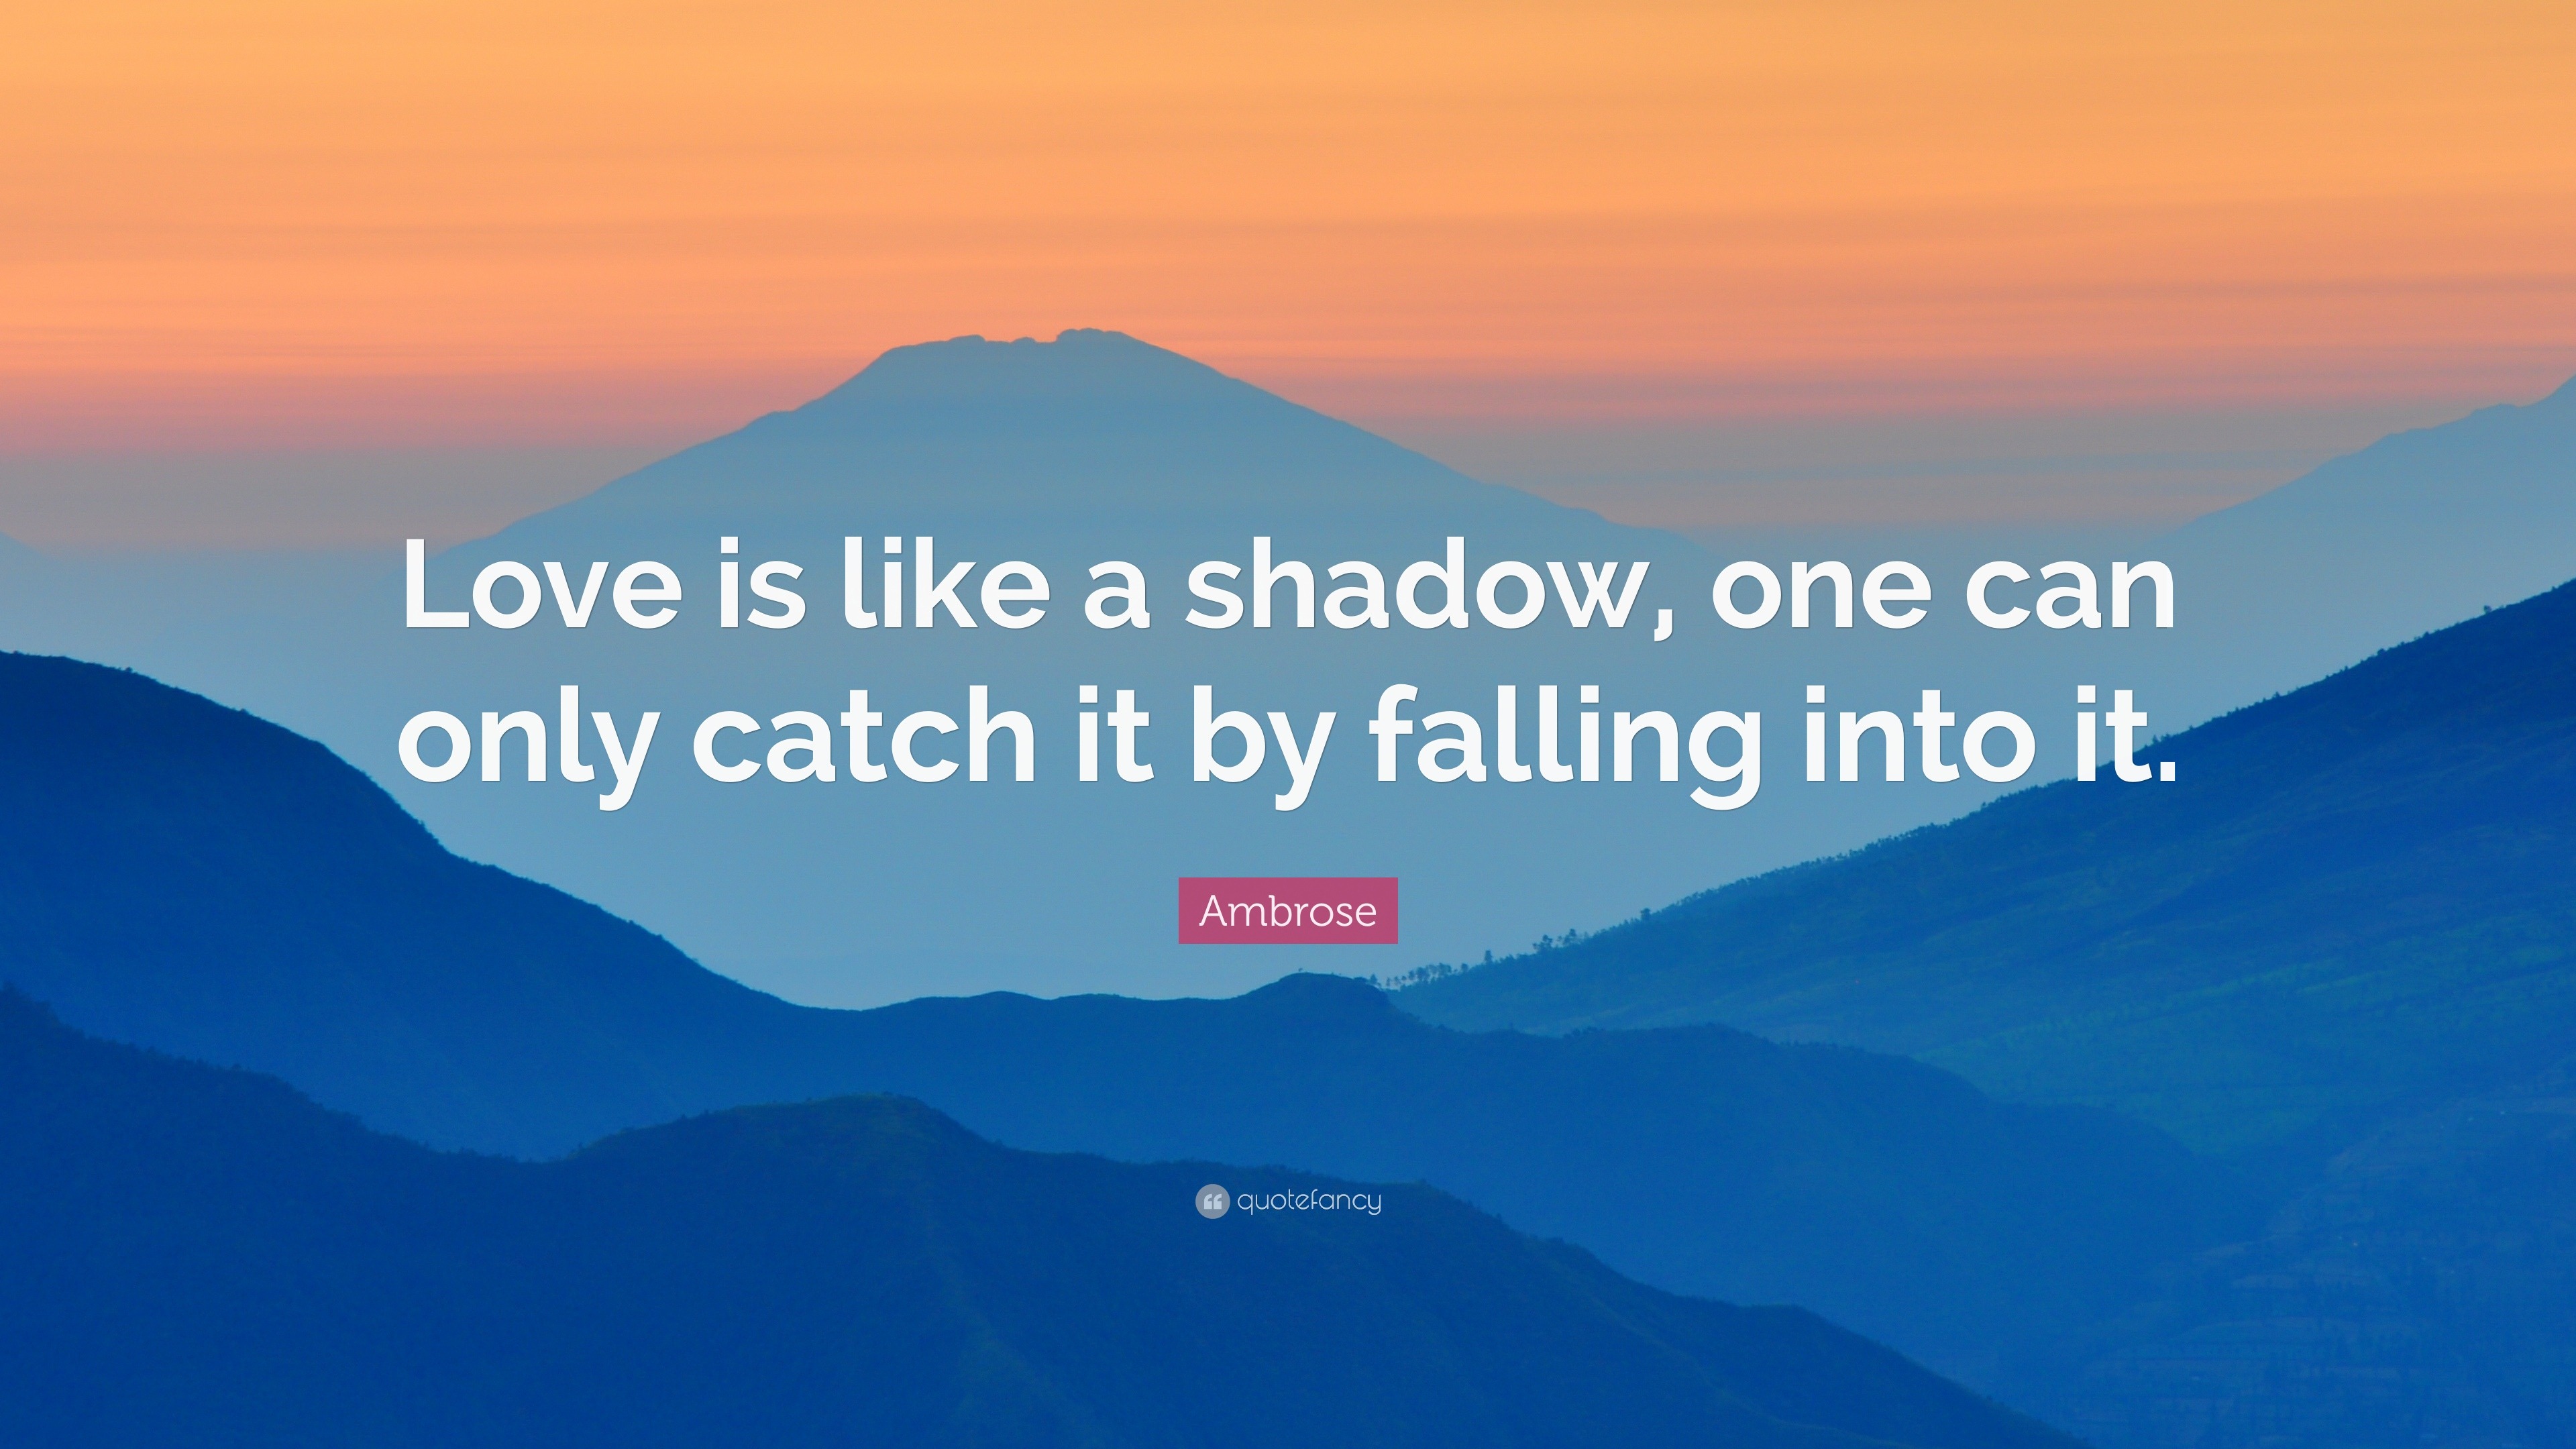 Ambrose Quote “Love is like a shadow one can only catch it by